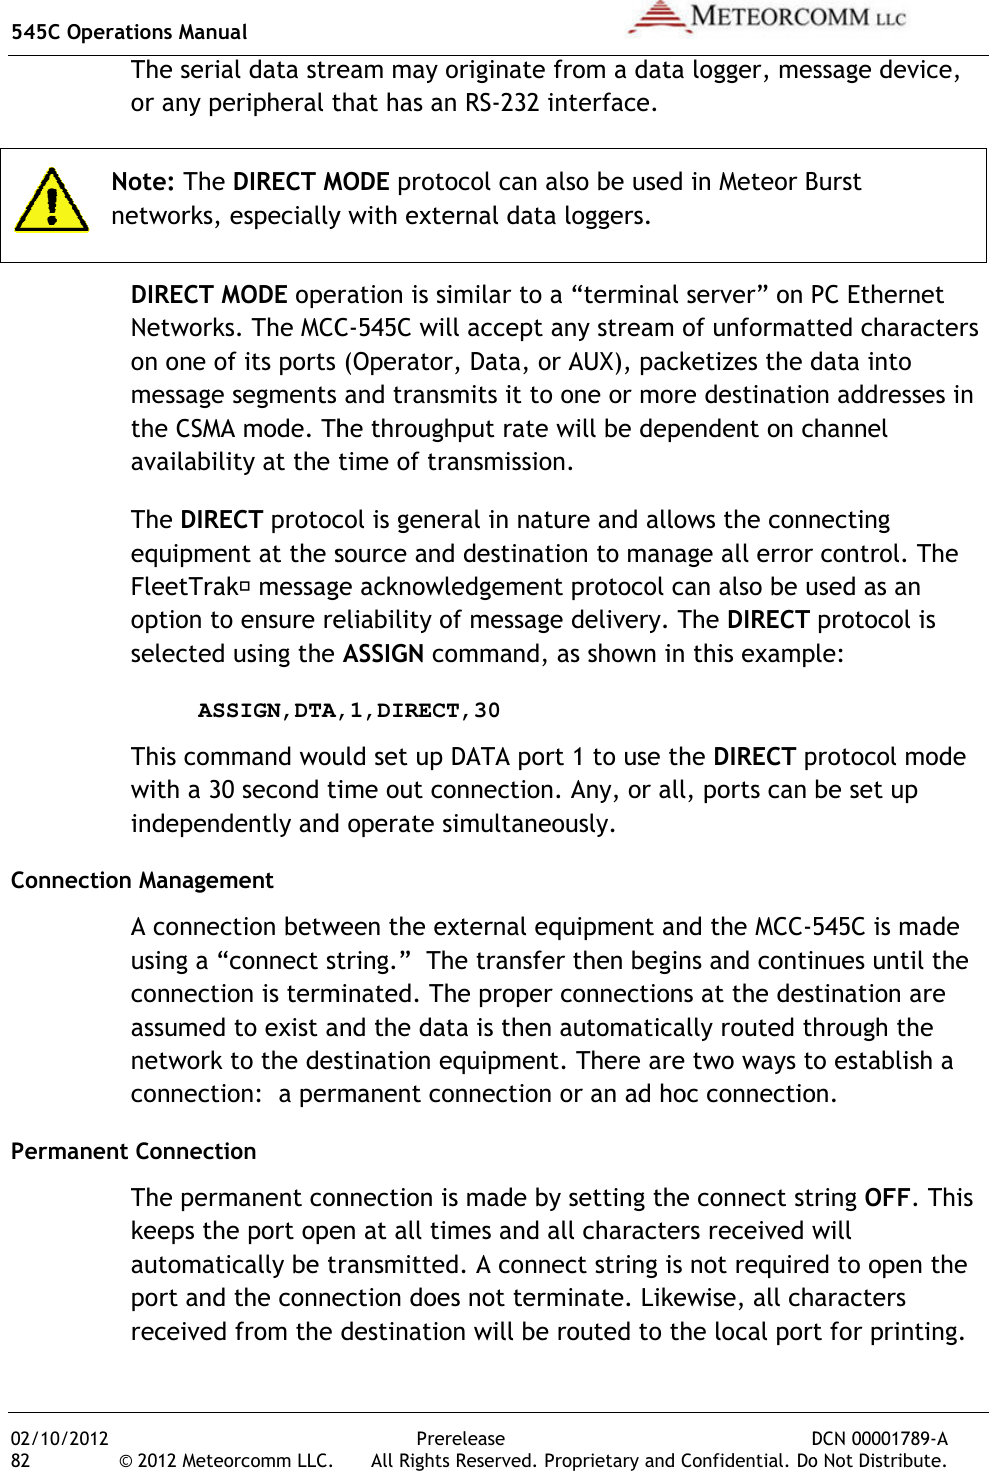 545C Operations Manual 02/10/2012 82 © 2012 Meteorcomm LLC. The serial data stream may originate from a data logger, message device, or any peripheral that has an RS Note: The DIRECT MODEnetworks, especially with external data loggers.DIRECT MODE operation is similar to a “terminal server” on PC Ethernet Networks. The MCCon one of its ports (Operator, Data, or AUX), packetizes the data into message segments and transmits it to one or more destthe CSMA mode. The throughput rate will be dependent on channel availability at the time of transmission.The DIRECT protocol is general in nature and allows the connecting equipment at the source and destination to manage all error coFleetTrak message acknowledgement protocol can also be used as an option to ensure reliability of message deliveryselected using the  ASSIGN,DTA,1,DIRECT,30This command would swith a 30 second time out connectionindependently and operate simultaneously.Connection Management A connection between the external equipment and the MCCusing a “connect string.”  The transfer then begins and continues until the connection is terminatedassumed to exist and the data is then automatically routed through the network to the destination equipmentconnection:  a permanent connection or an ad hoc connection.Permanent Connection The permanent connection is made by setting the connect string keeps the port open at all times and all characters received will automatically be transmittedport and the connection does not terminatereceived from the destination will be routed to the local port for printing.Prerelease DCN © 2012 Meteorcomm LLC.  All Rights Reserved. Proprietary and Confidential. Do Not Distribute.The serial data stream may originate from a data logger, message device, or any peripheral that has an RS-232 interface. DIRECT MODE protocol can also be used in Meteor Burst networks, especially with external data loggers. operation is similar to a “terminal server” on PC Ethernet The MCC-545C will accept any stream of unformatted characters on one of its ports (Operator, Data, or AUX), packetizes the data into message segments and transmits it to one or more destination addresses in The throughput rate will be dependent on channel availability at the time of transmission. protocol is general in nature and allows the connecting equipment at the source and destination to manage all error co message acknowledgement protocol can also be used as an option to ensure reliability of message delivery. The DIRECT selected using the ASSIGN command, as shown in this example:ASSIGN,DTA,1,DIRECT,30 This command would set up DATA port 1 to use the DIRECT protocol mode with a 30 second time out connection. Any, or all, ports can be set up independently and operate simultaneously. A connection between the external equipment and the MCC-545C is made ing a “connect string.”  The transfer then begins and continues until the connection is terminated. The proper connections at the destination are assumed to exist and the data is then automatically routed through the network to the destination equipment. There are two ways to establish a connection:  a permanent connection or an ad hoc connection.The permanent connection is made by setting the connect string keeps the port open at all times and all characters received will tomatically be transmitted. A connect string is not required to open the port and the connection does not terminate. Likewise, all characters received from the destination will be routed to the local port for printing. DCN 00001789-A All Rights Reserved. Proprietary and Confidential. Do Not Distribute. The serial data stream may originate from a data logger, message device, protocol can also be used in Meteor Burst operation is similar to a “terminal server” on PC Ethernet 545C will accept any stream of unformatted characters on one of its ports (Operator, Data, or AUX), packetizes the data into ination addresses in The throughput rate will be dependent on channel protocol is general in nature and allows the connecting equipment at the source and destination to manage all error control. The  message acknowledgement protocol can also be used as an  protocol is command, as shown in this example: protocol mode Any, or all, ports can be set up 545C is made ing a “connect string.”  The transfer then begins and continues until the The proper connections at the destination are assumed to exist and the data is then automatically routed through the here are two ways to establish a connection:  a permanent connection or an ad hoc connection. The permanent connection is made by setting the connect string OFF. This keeps the port open at all times and all characters received will A connect string is not required to open the Likewise, all characters received from the destination will be routed to the local port for printing. 